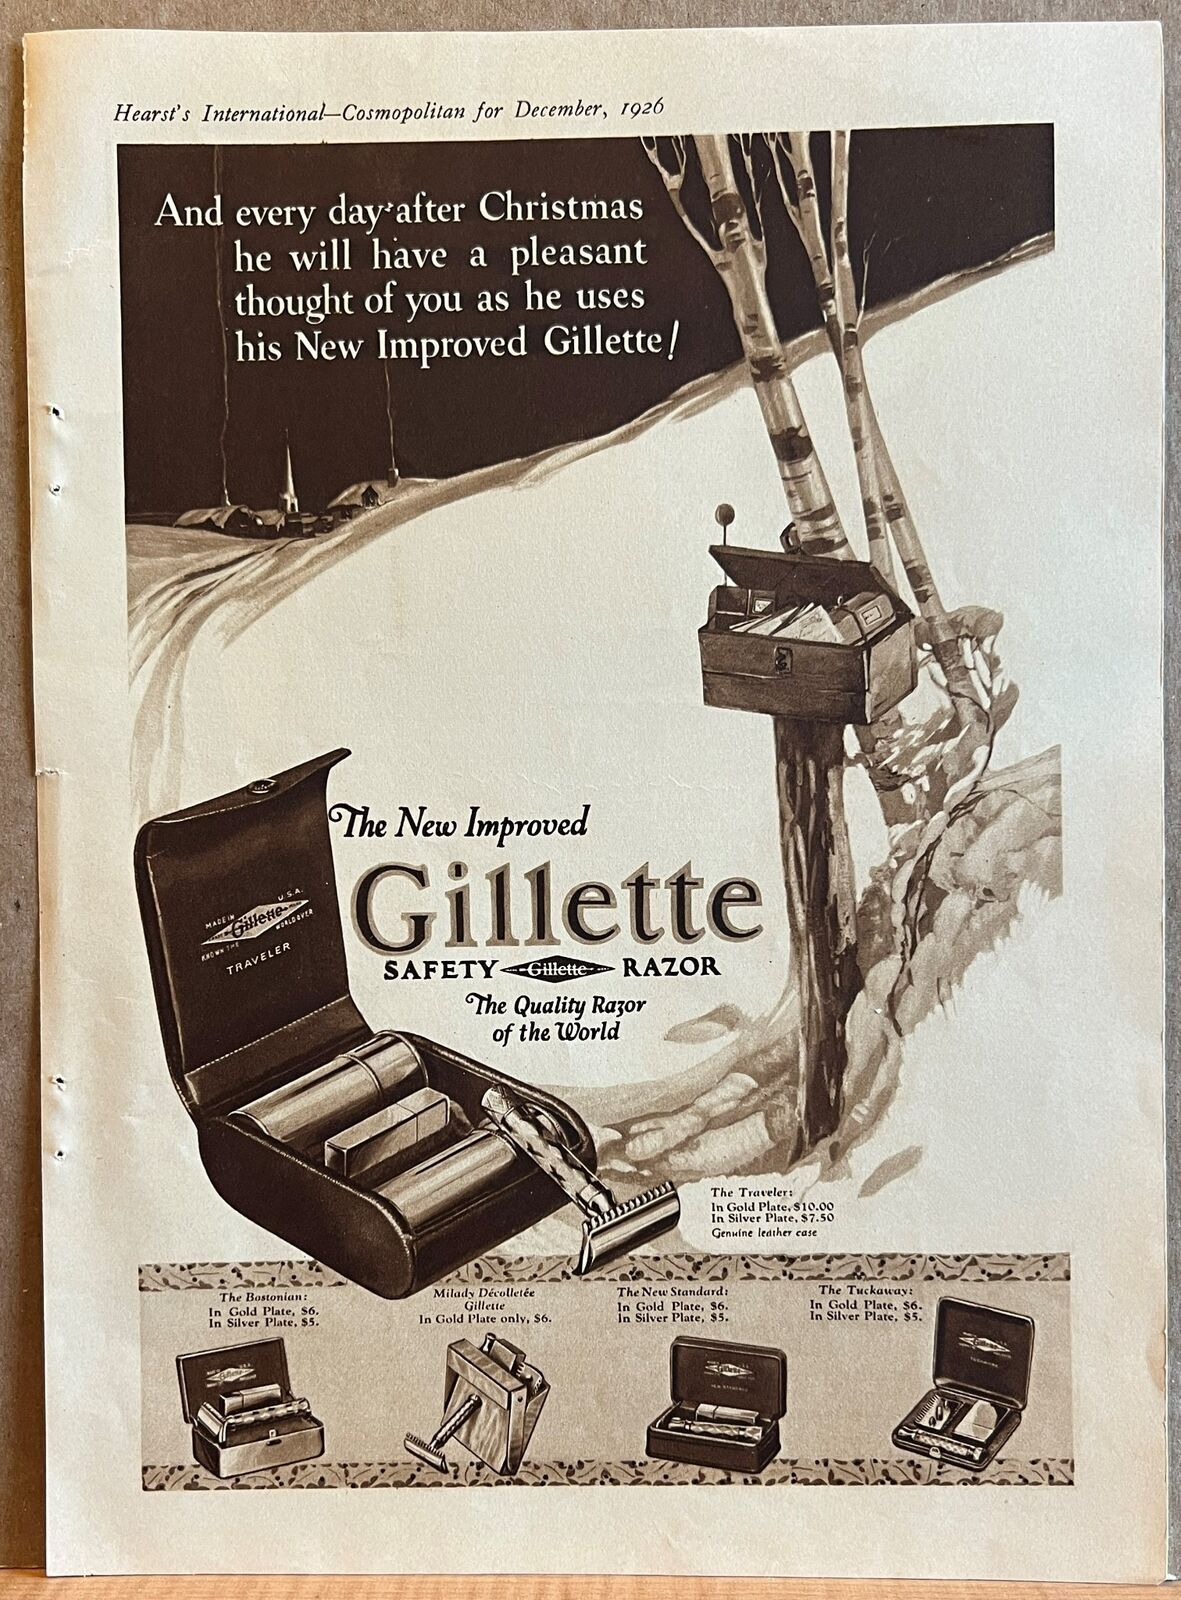 1926 Gillette Safety Razor Print Ad After Christmas He Will Have Pleasant Though